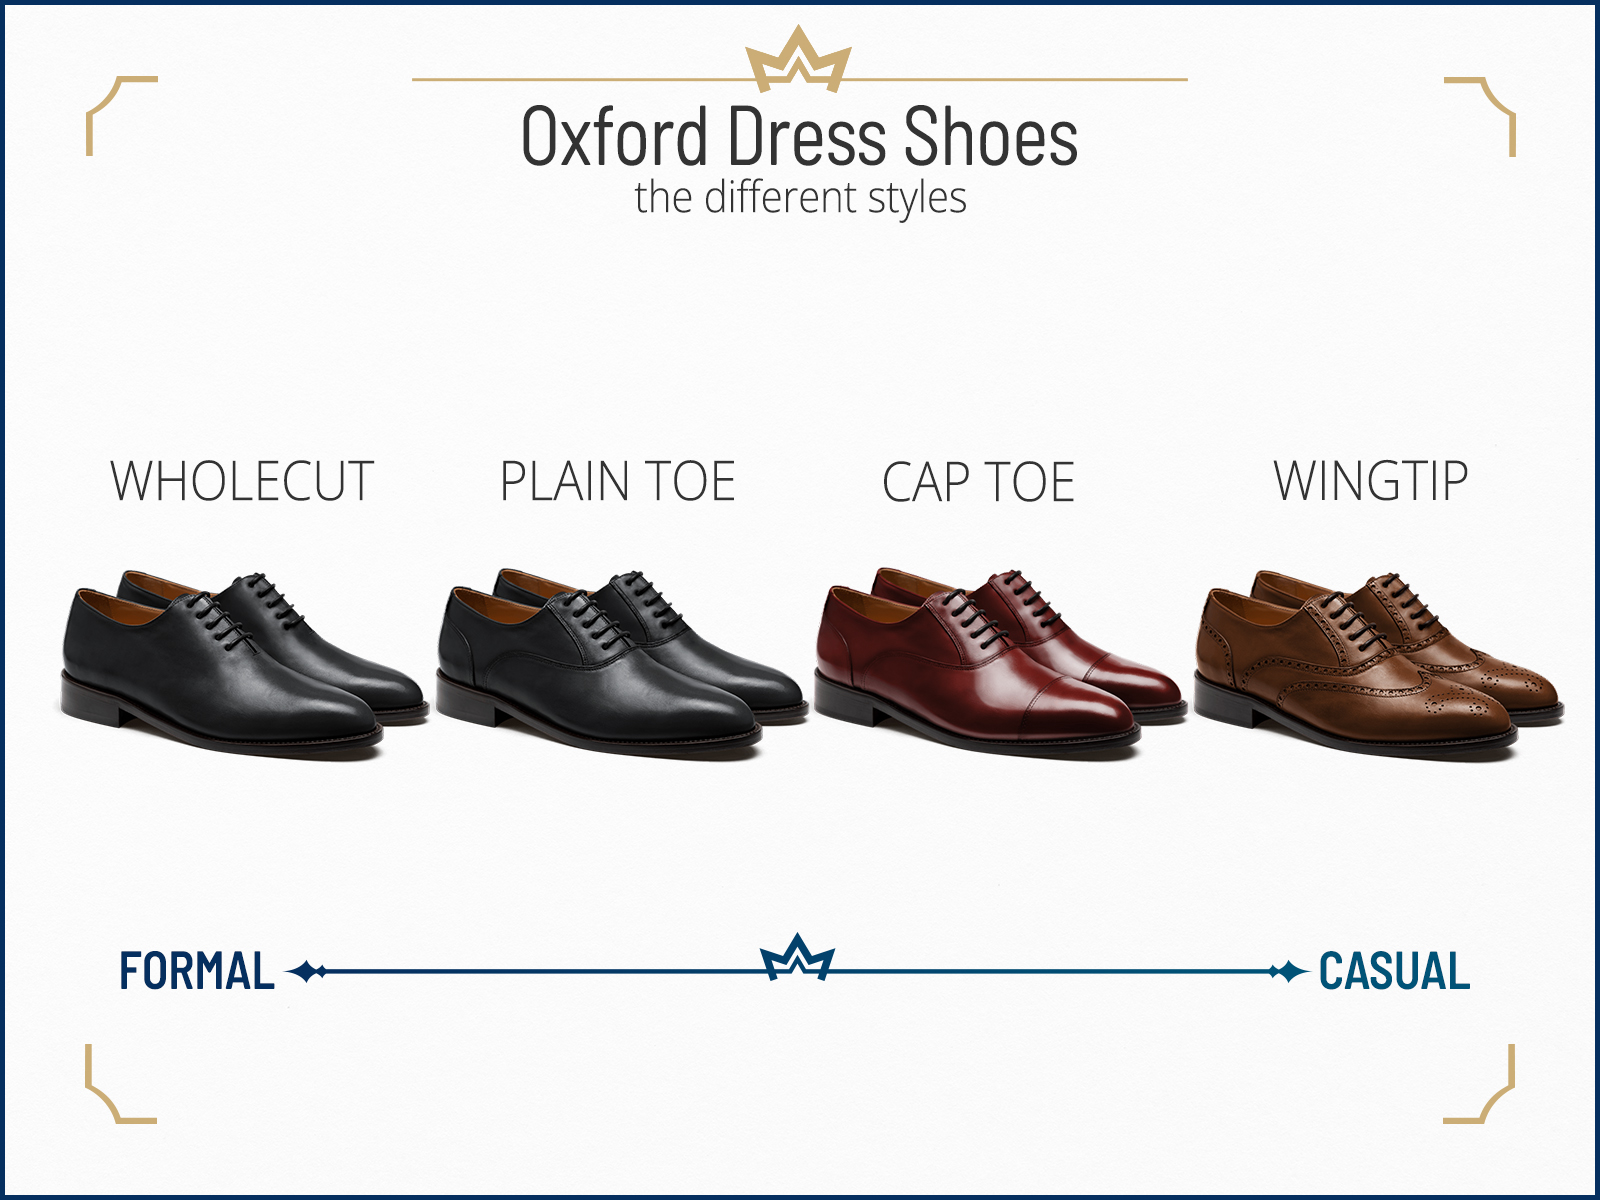 Different Oxford dress shoe types and their formality: wholecut vs. plain toe vs. cap toe vs. wingtip